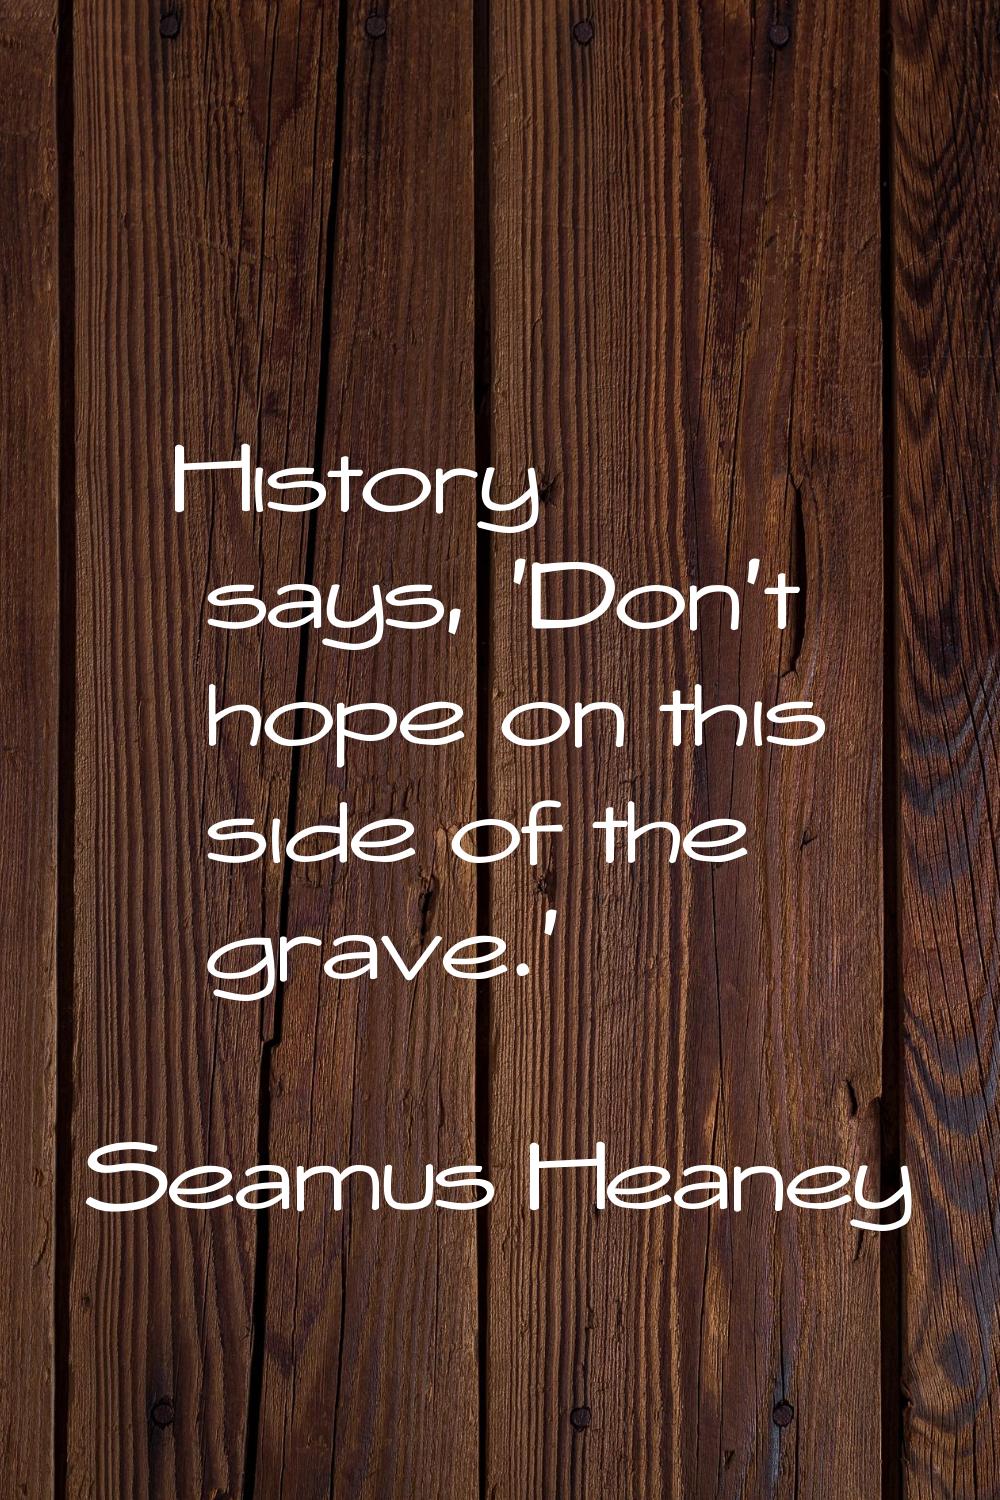 History says, 'Don't hope on this side of the grave.'